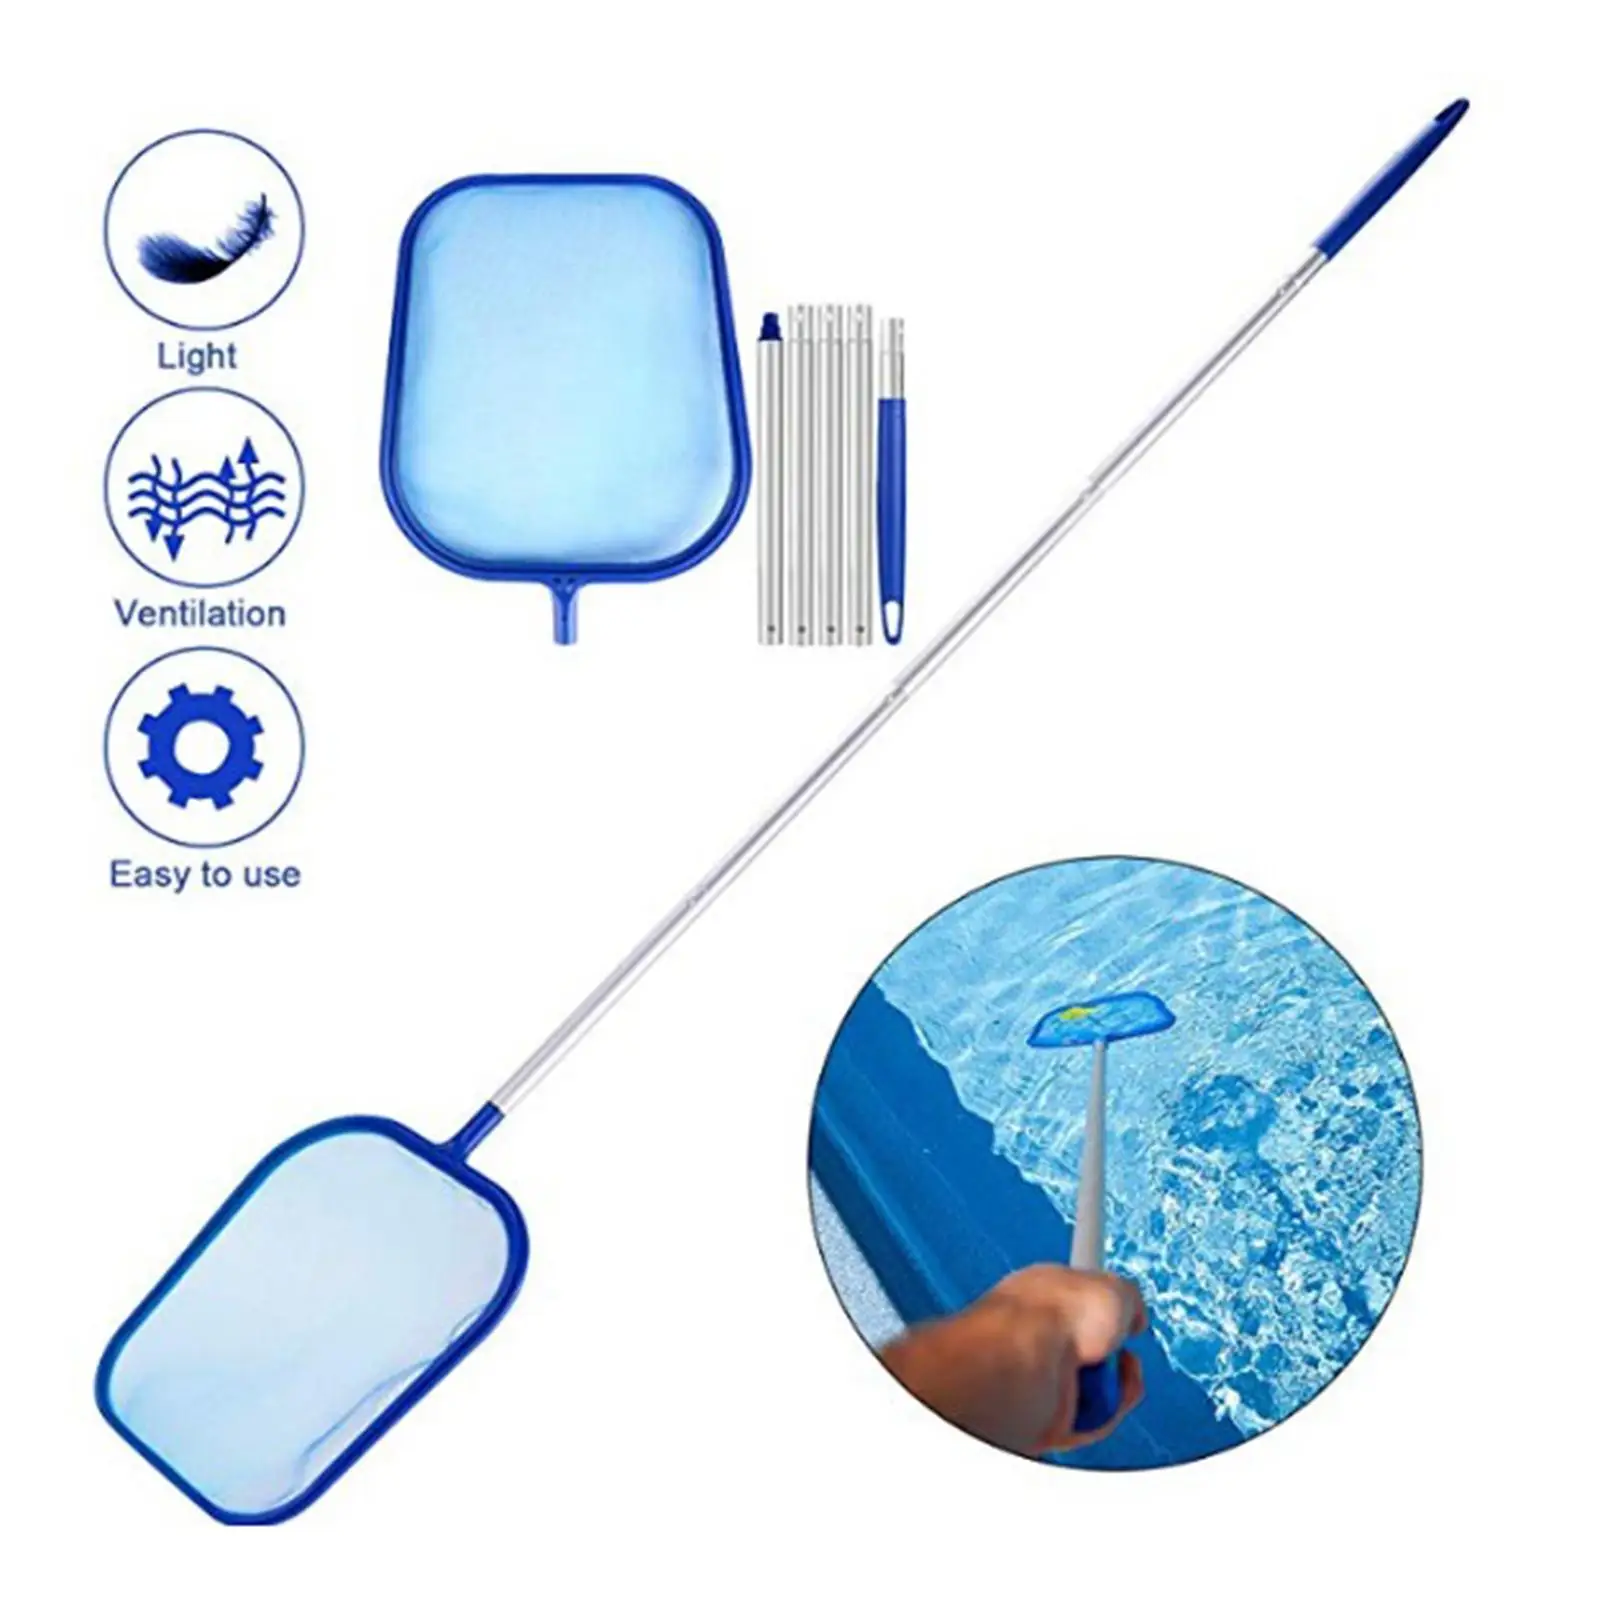  Cleaning   Brush Head 5pcs Poles Fine Mesh Netting Cleaning Tool Maintenance Above Ground  Tub